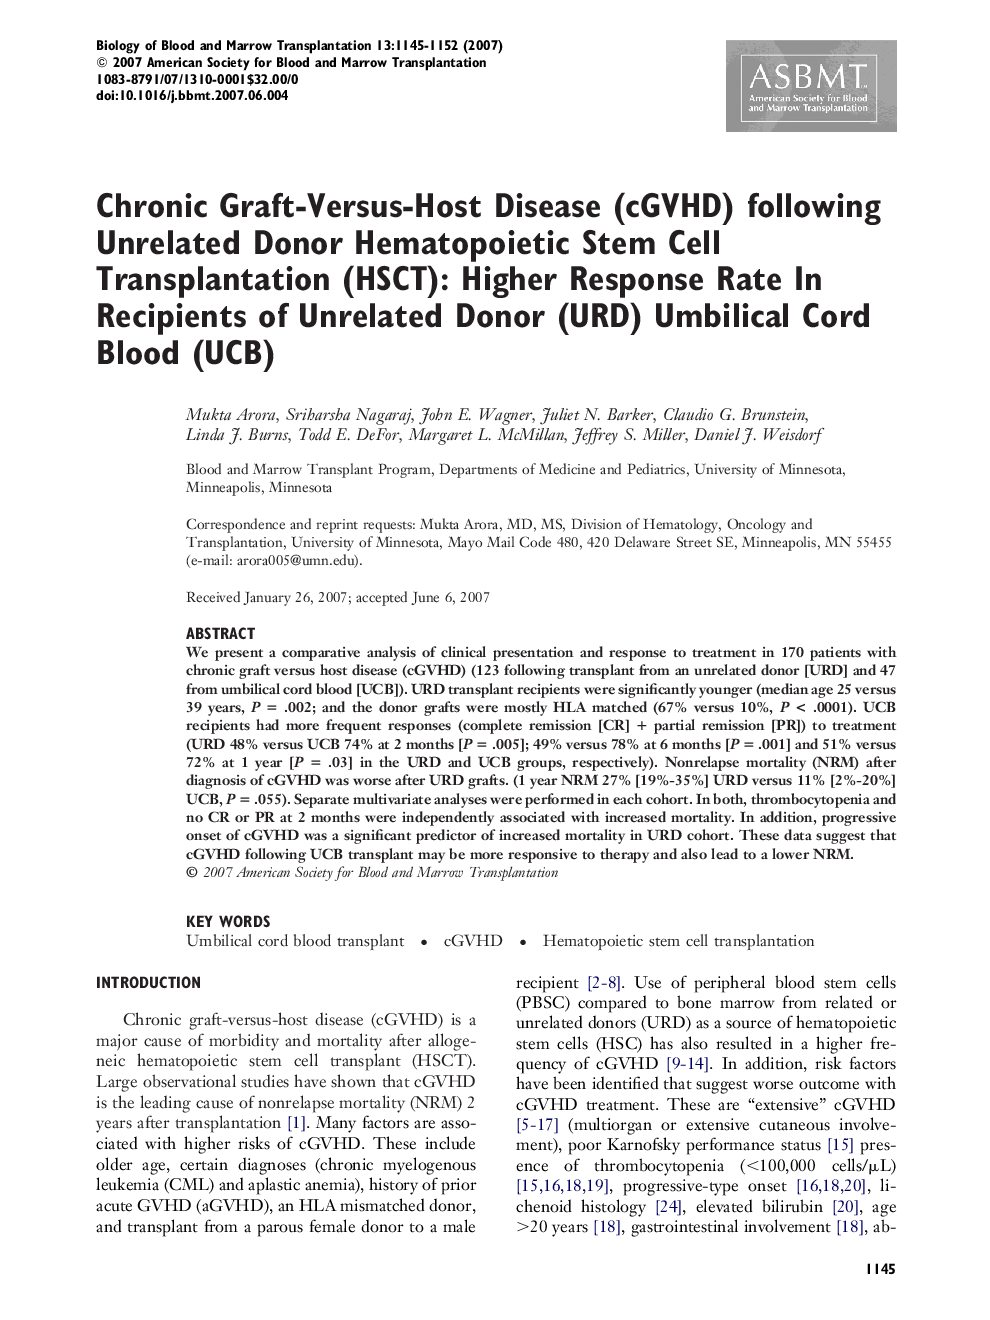 Chronic Graft-Versus-Host Disease (cGVHD) following Unrelated Donor Hematopoietic Stem Cell Transplantation (HSCT): Higher Response Rate In Recipients of Unrelated Donor (URD) Umbilical Cord Blood (UCB)